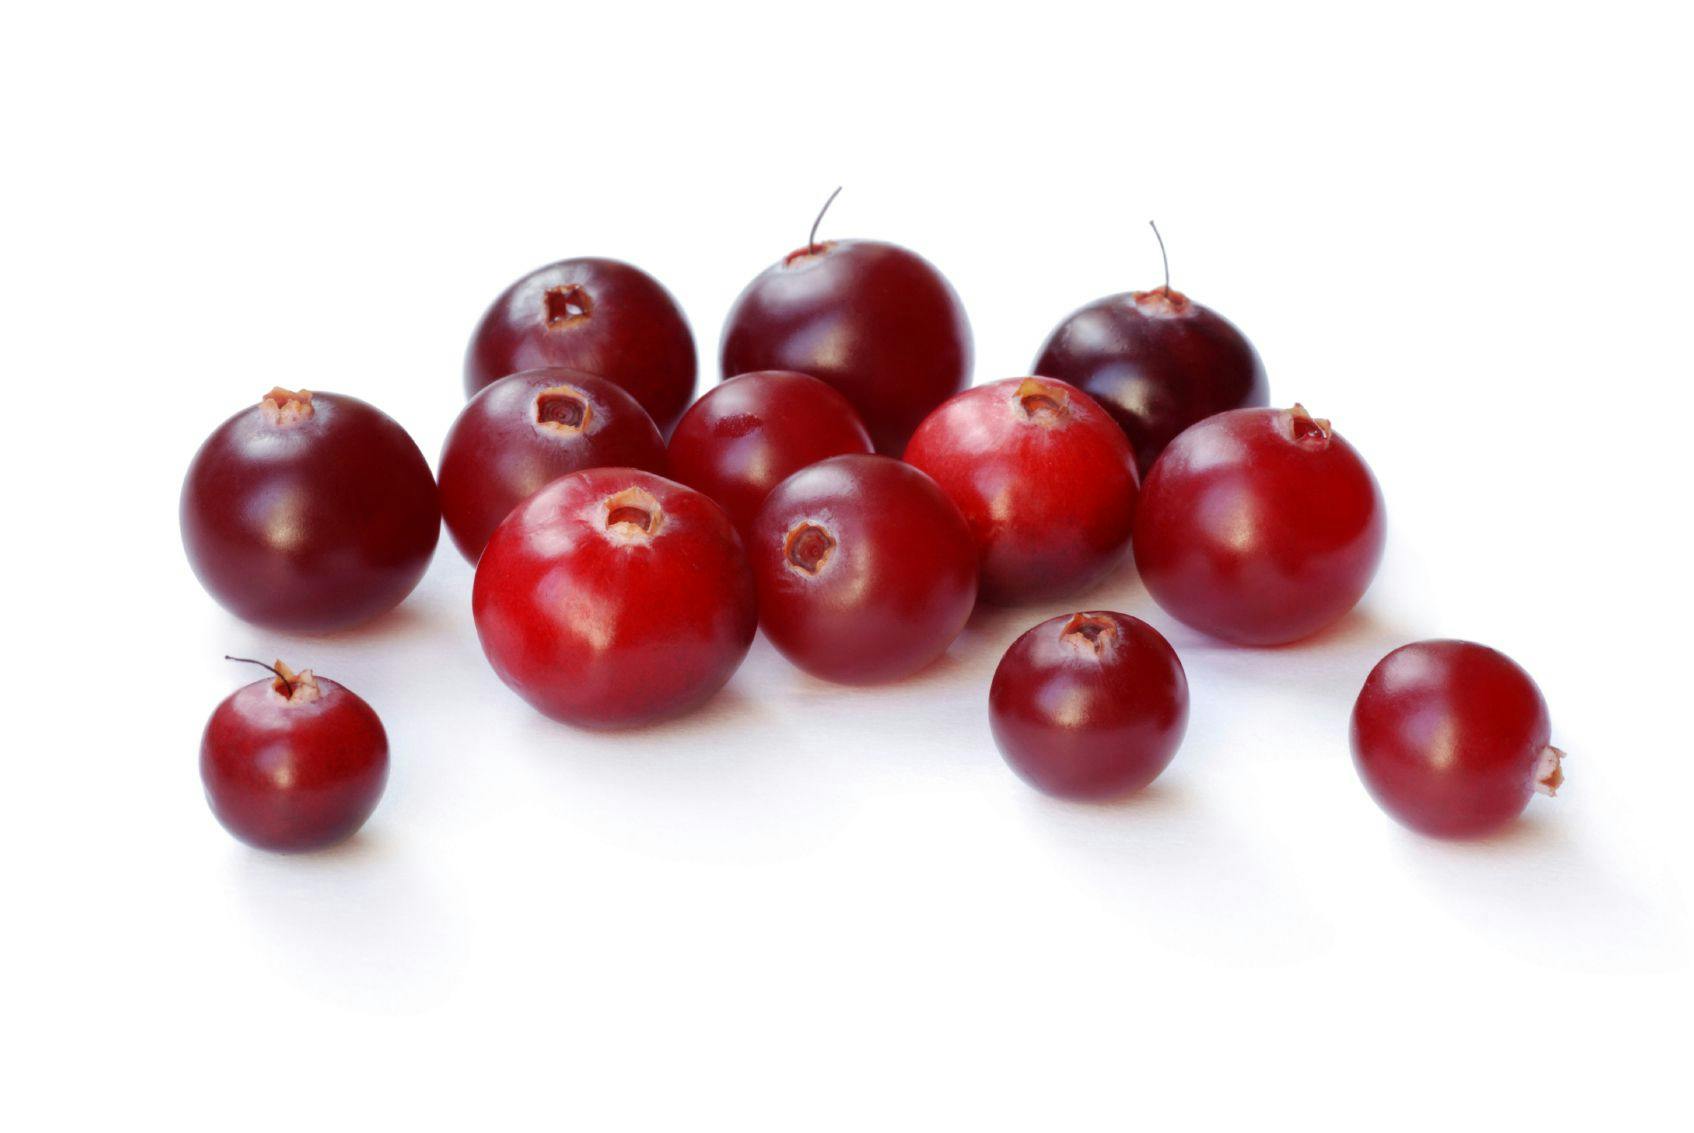 Cranberry Seed Oil Acts as Antimicrobial, Antioxidant in Personal Care, Cosmetic Applications